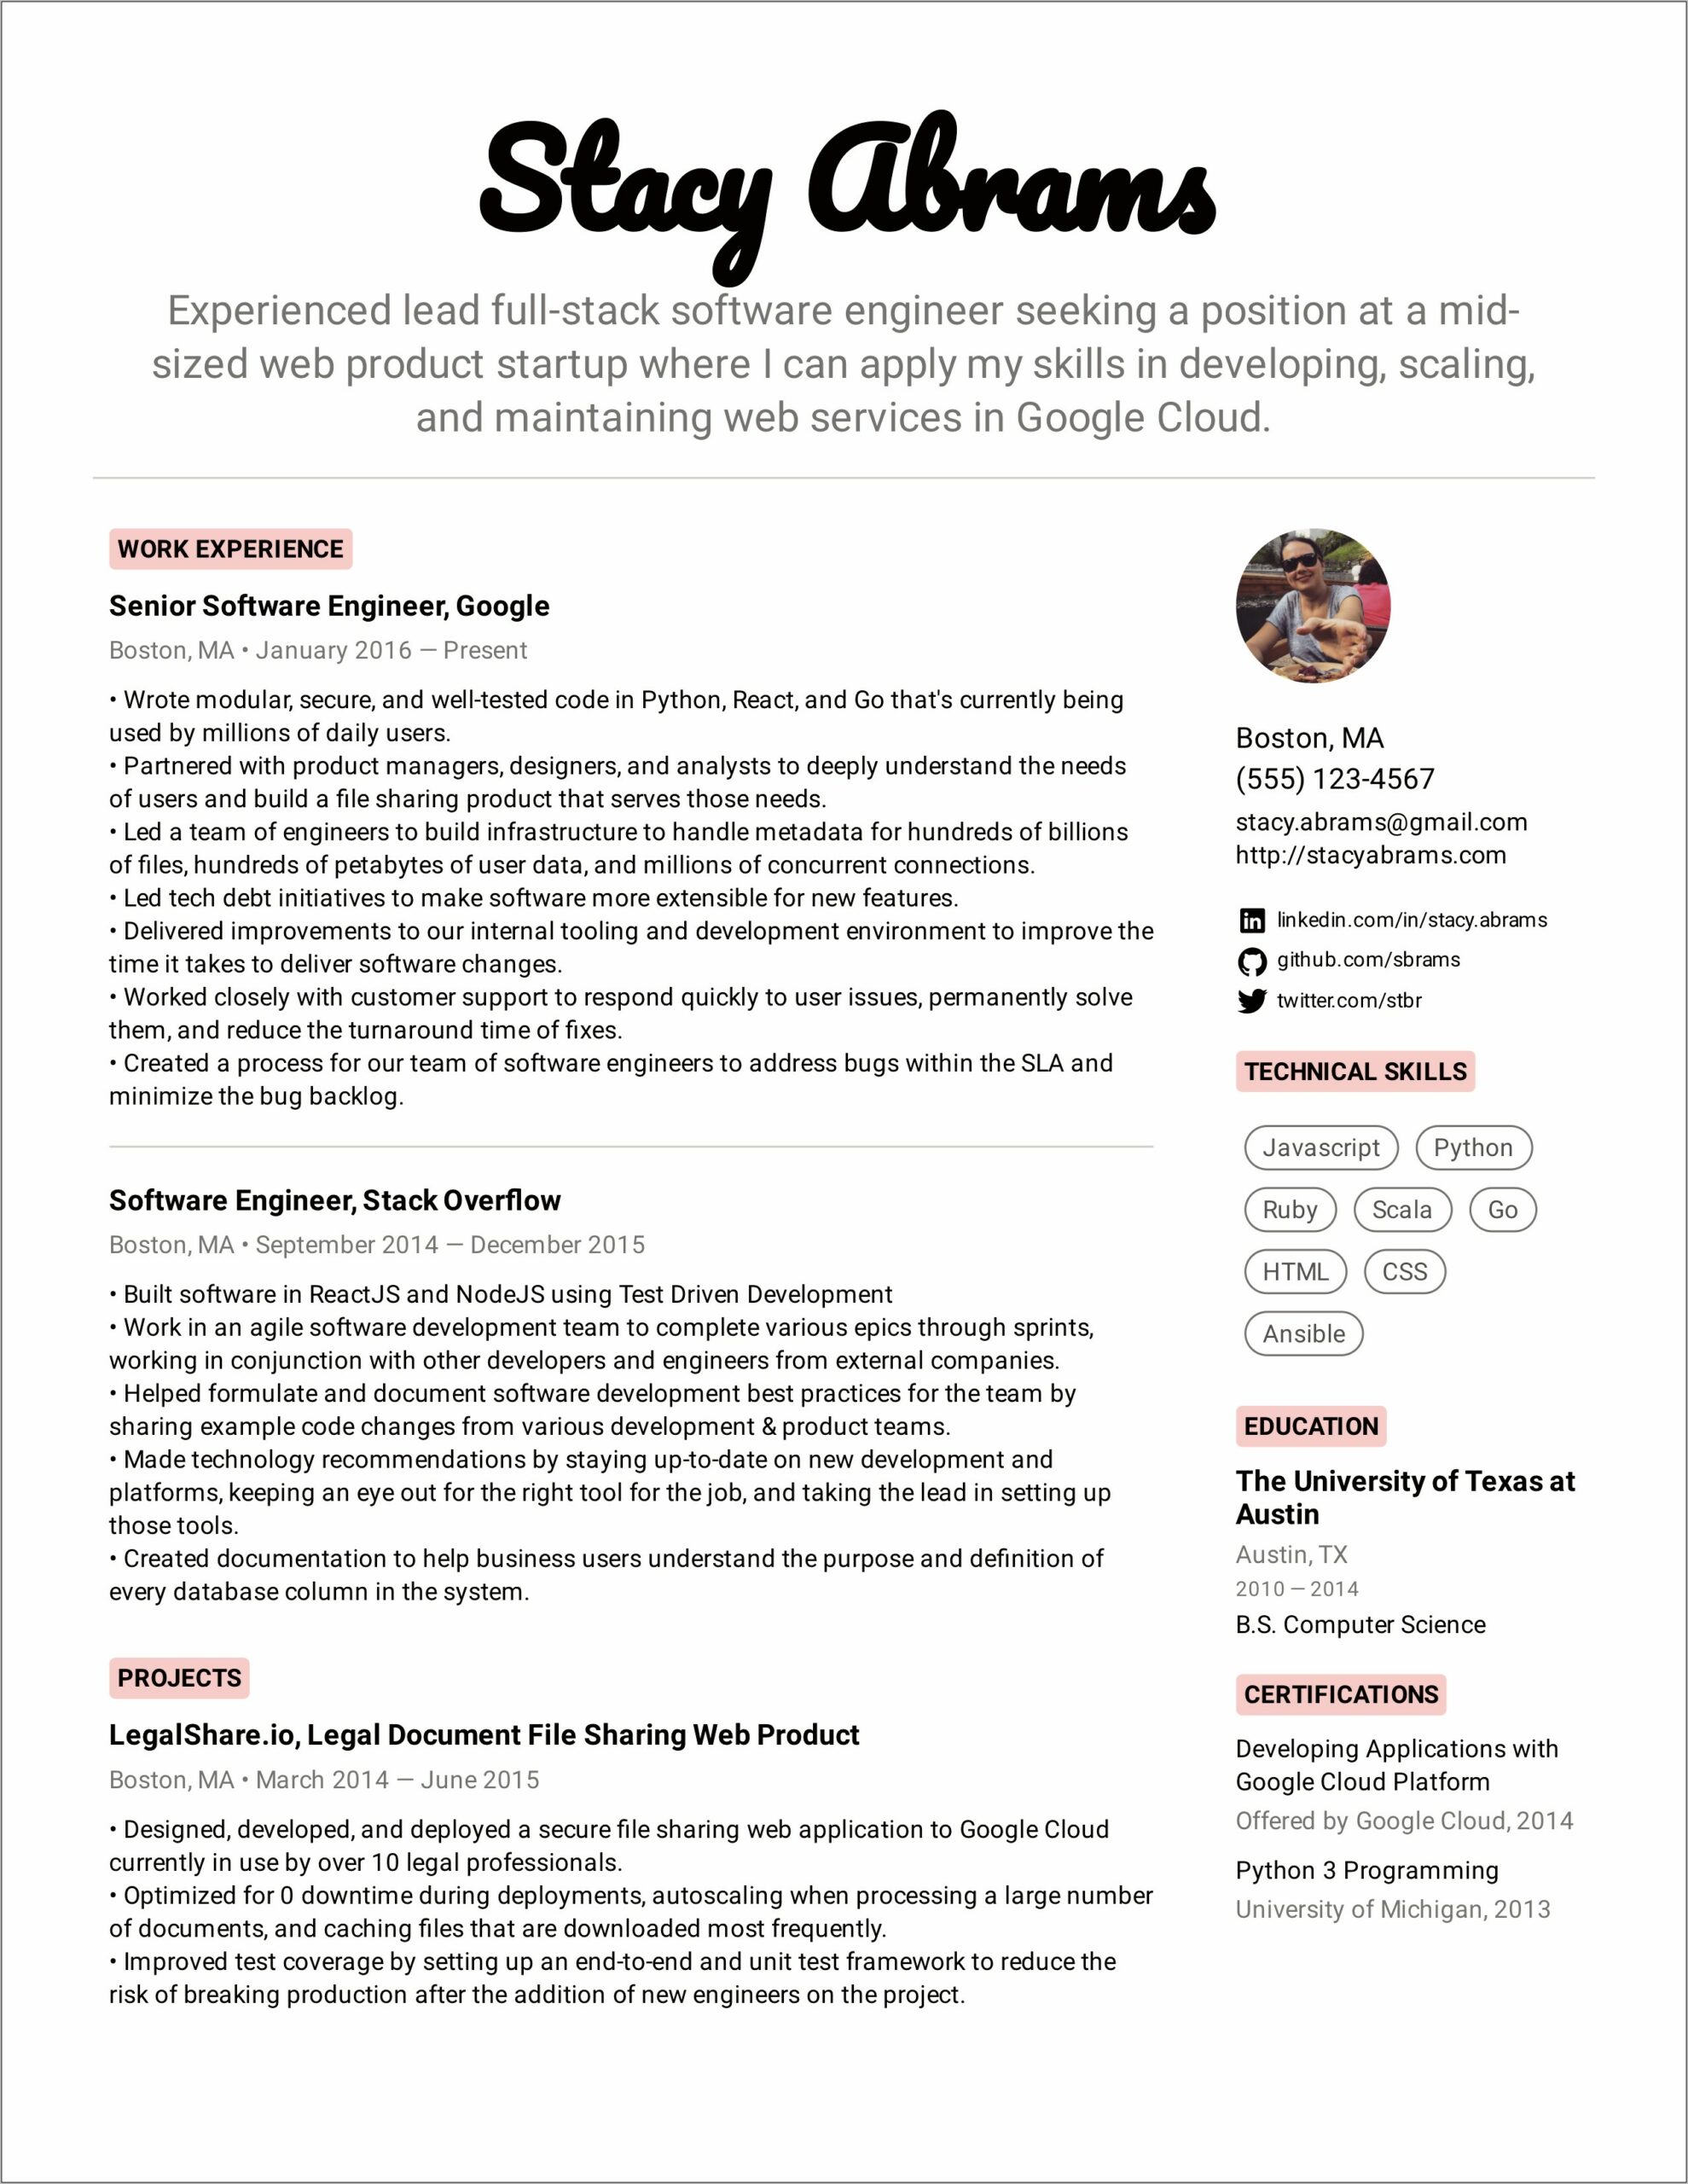 Resume Best Practices Tips Advice Example